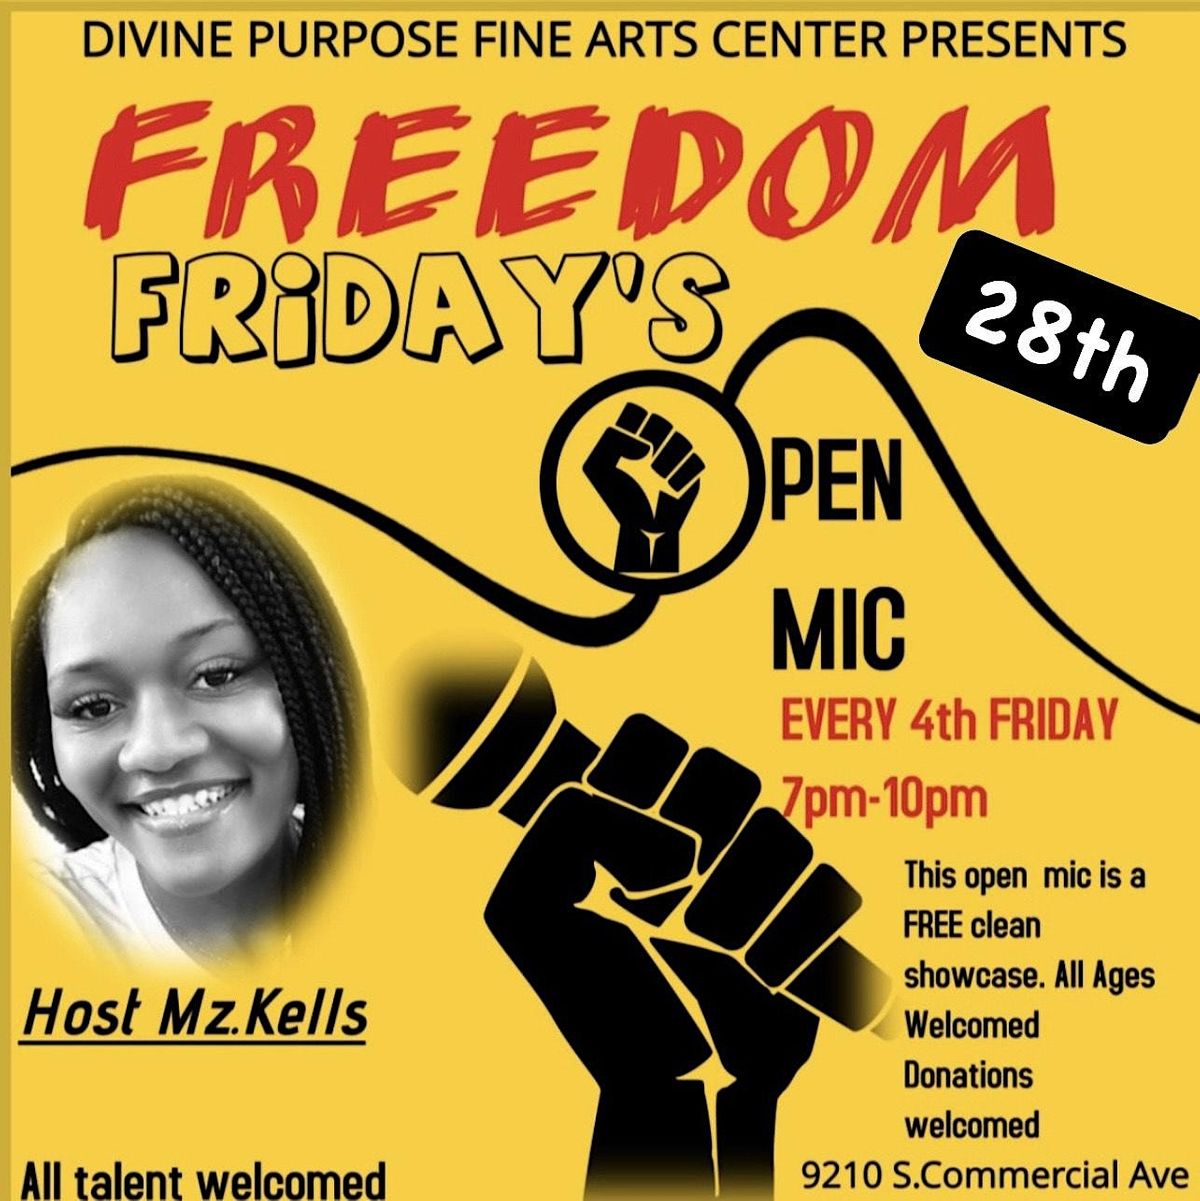 FREEDOM FRIDAY'S OPEN MIC